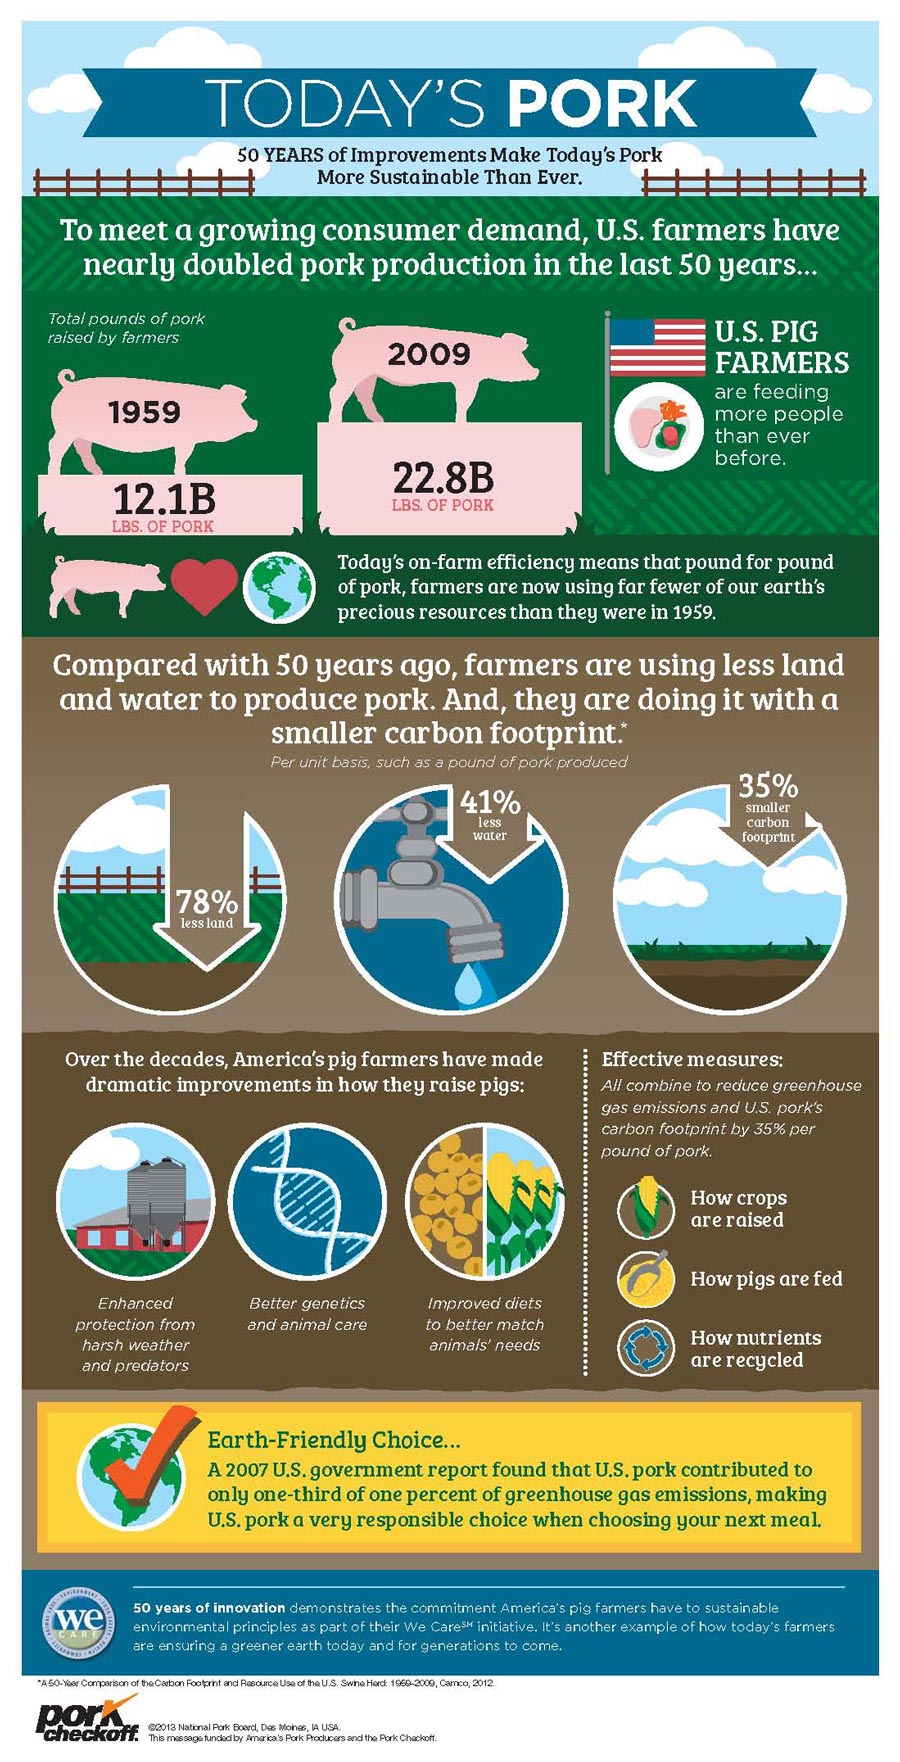 Fun facts about how farming has improved over the years.